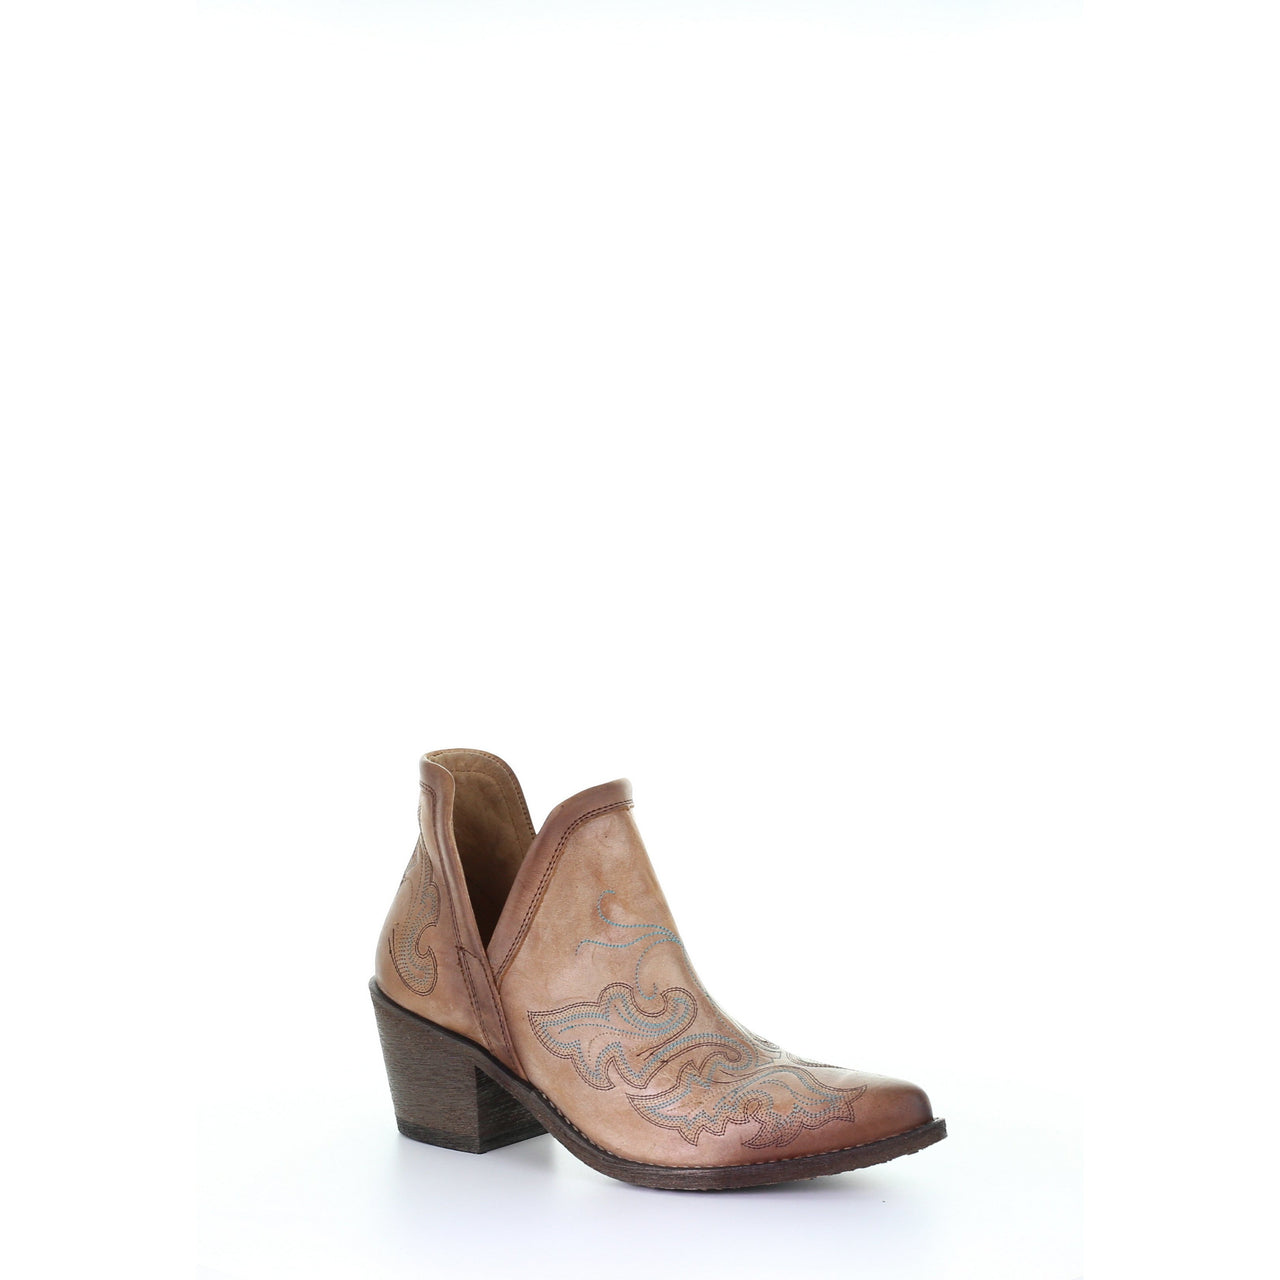 Women's Corral Leather Ankle Boots Handcrafted Cognac - yeehawcowboy